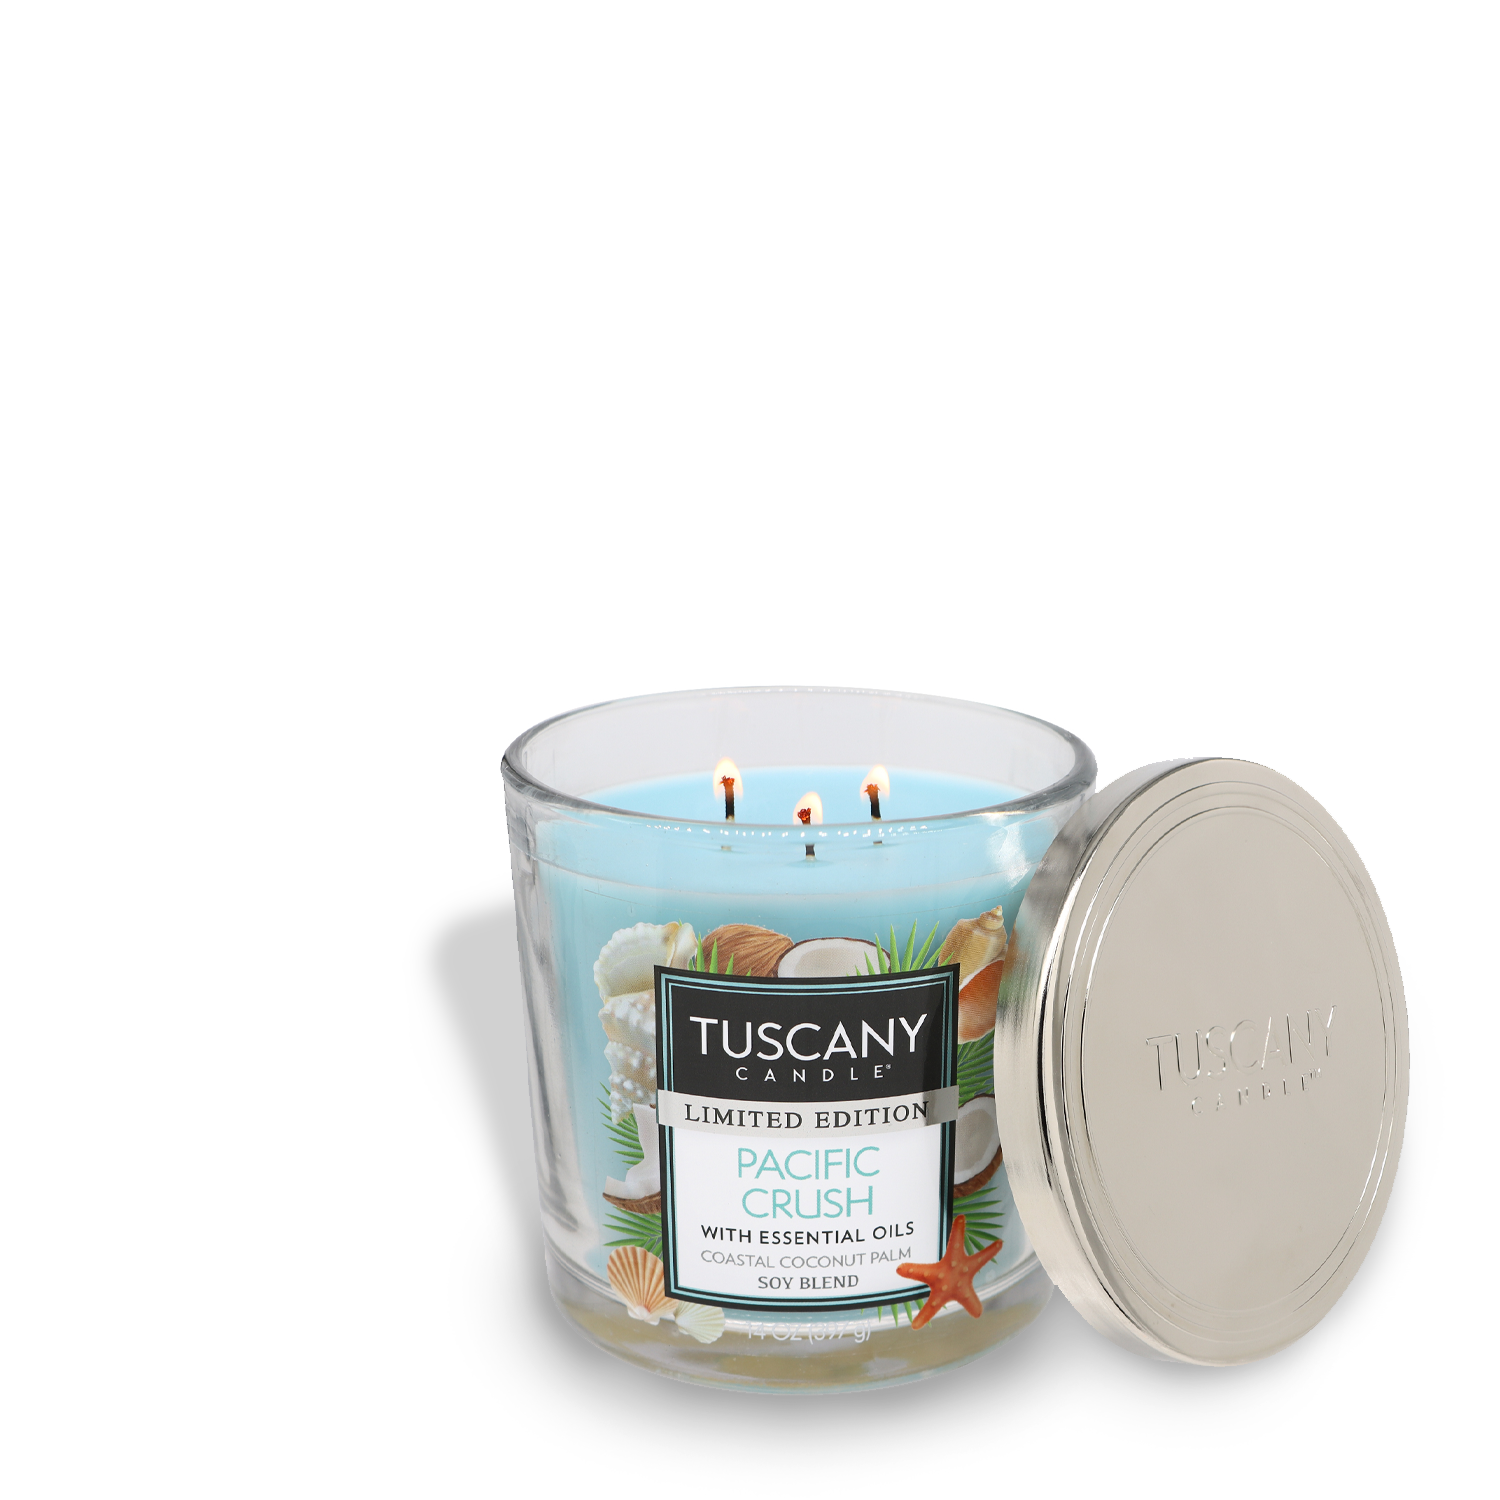 A Pacific Crush Long-Lasting Scented Jar Candle by Tuscany Candle® SEASONAL, with a 'pacific crush' fragrance, displayed with its lid off to the side.